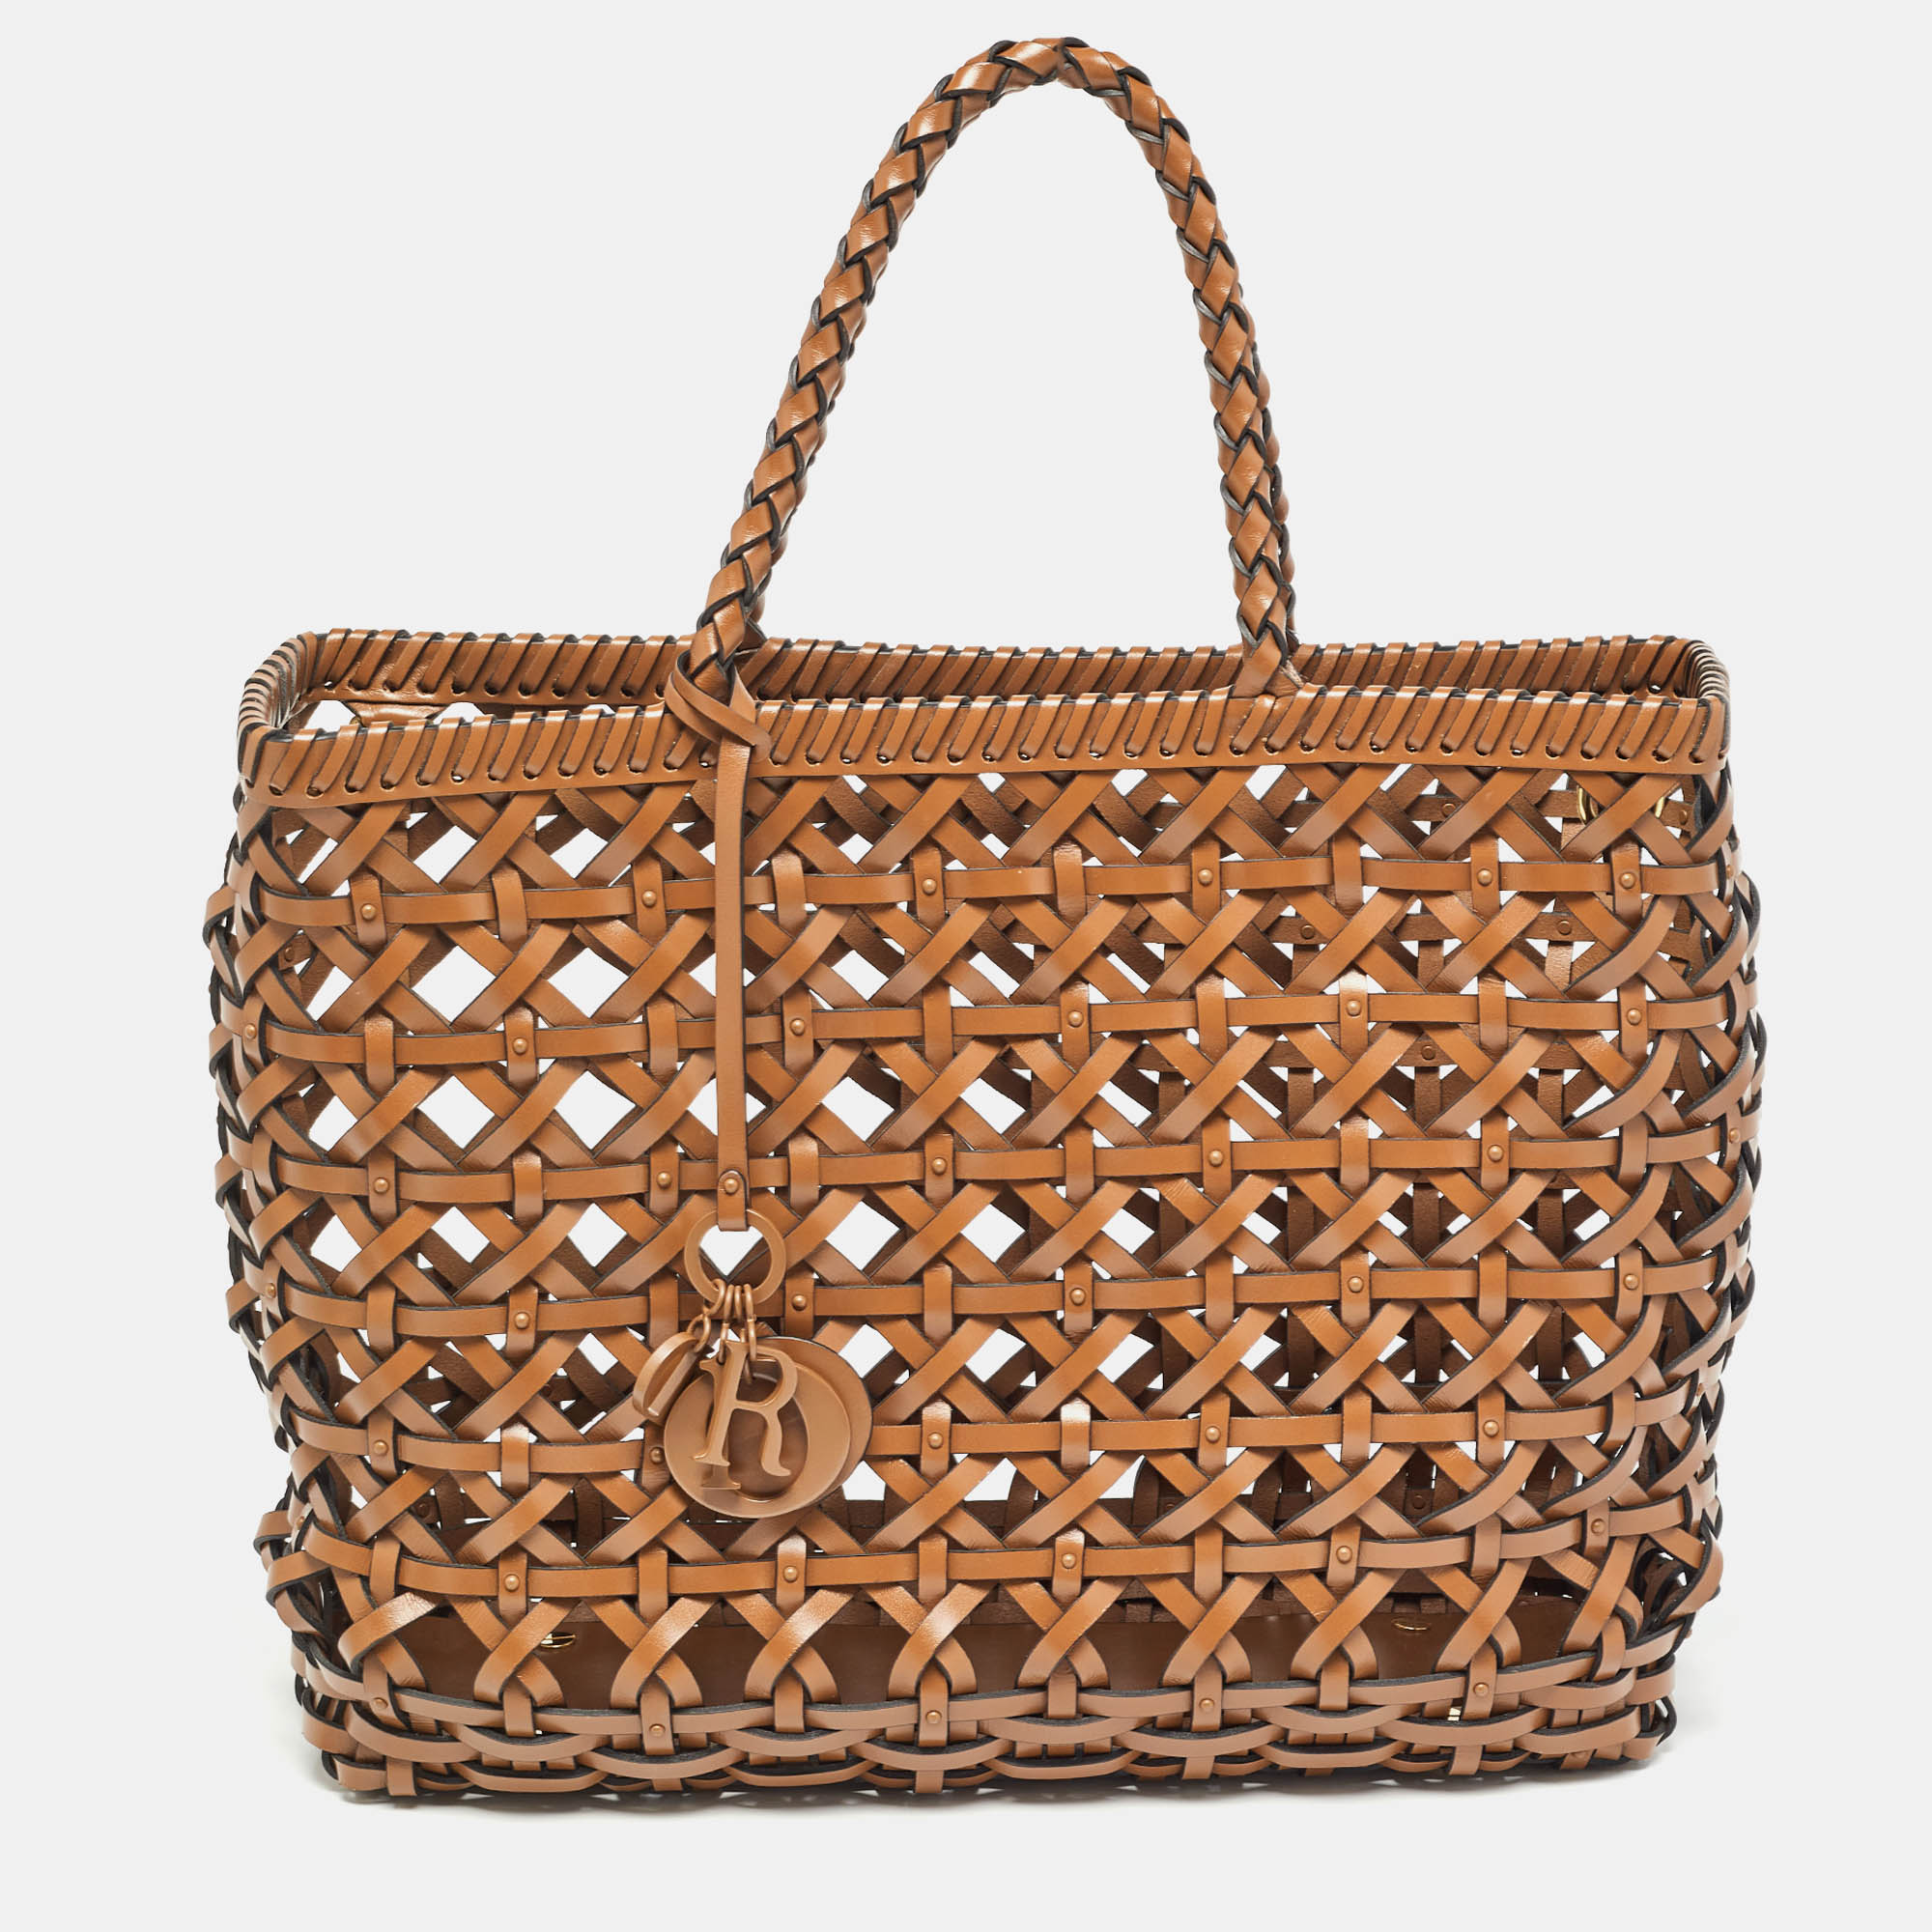 Dior brown woven leather diorcabas tote